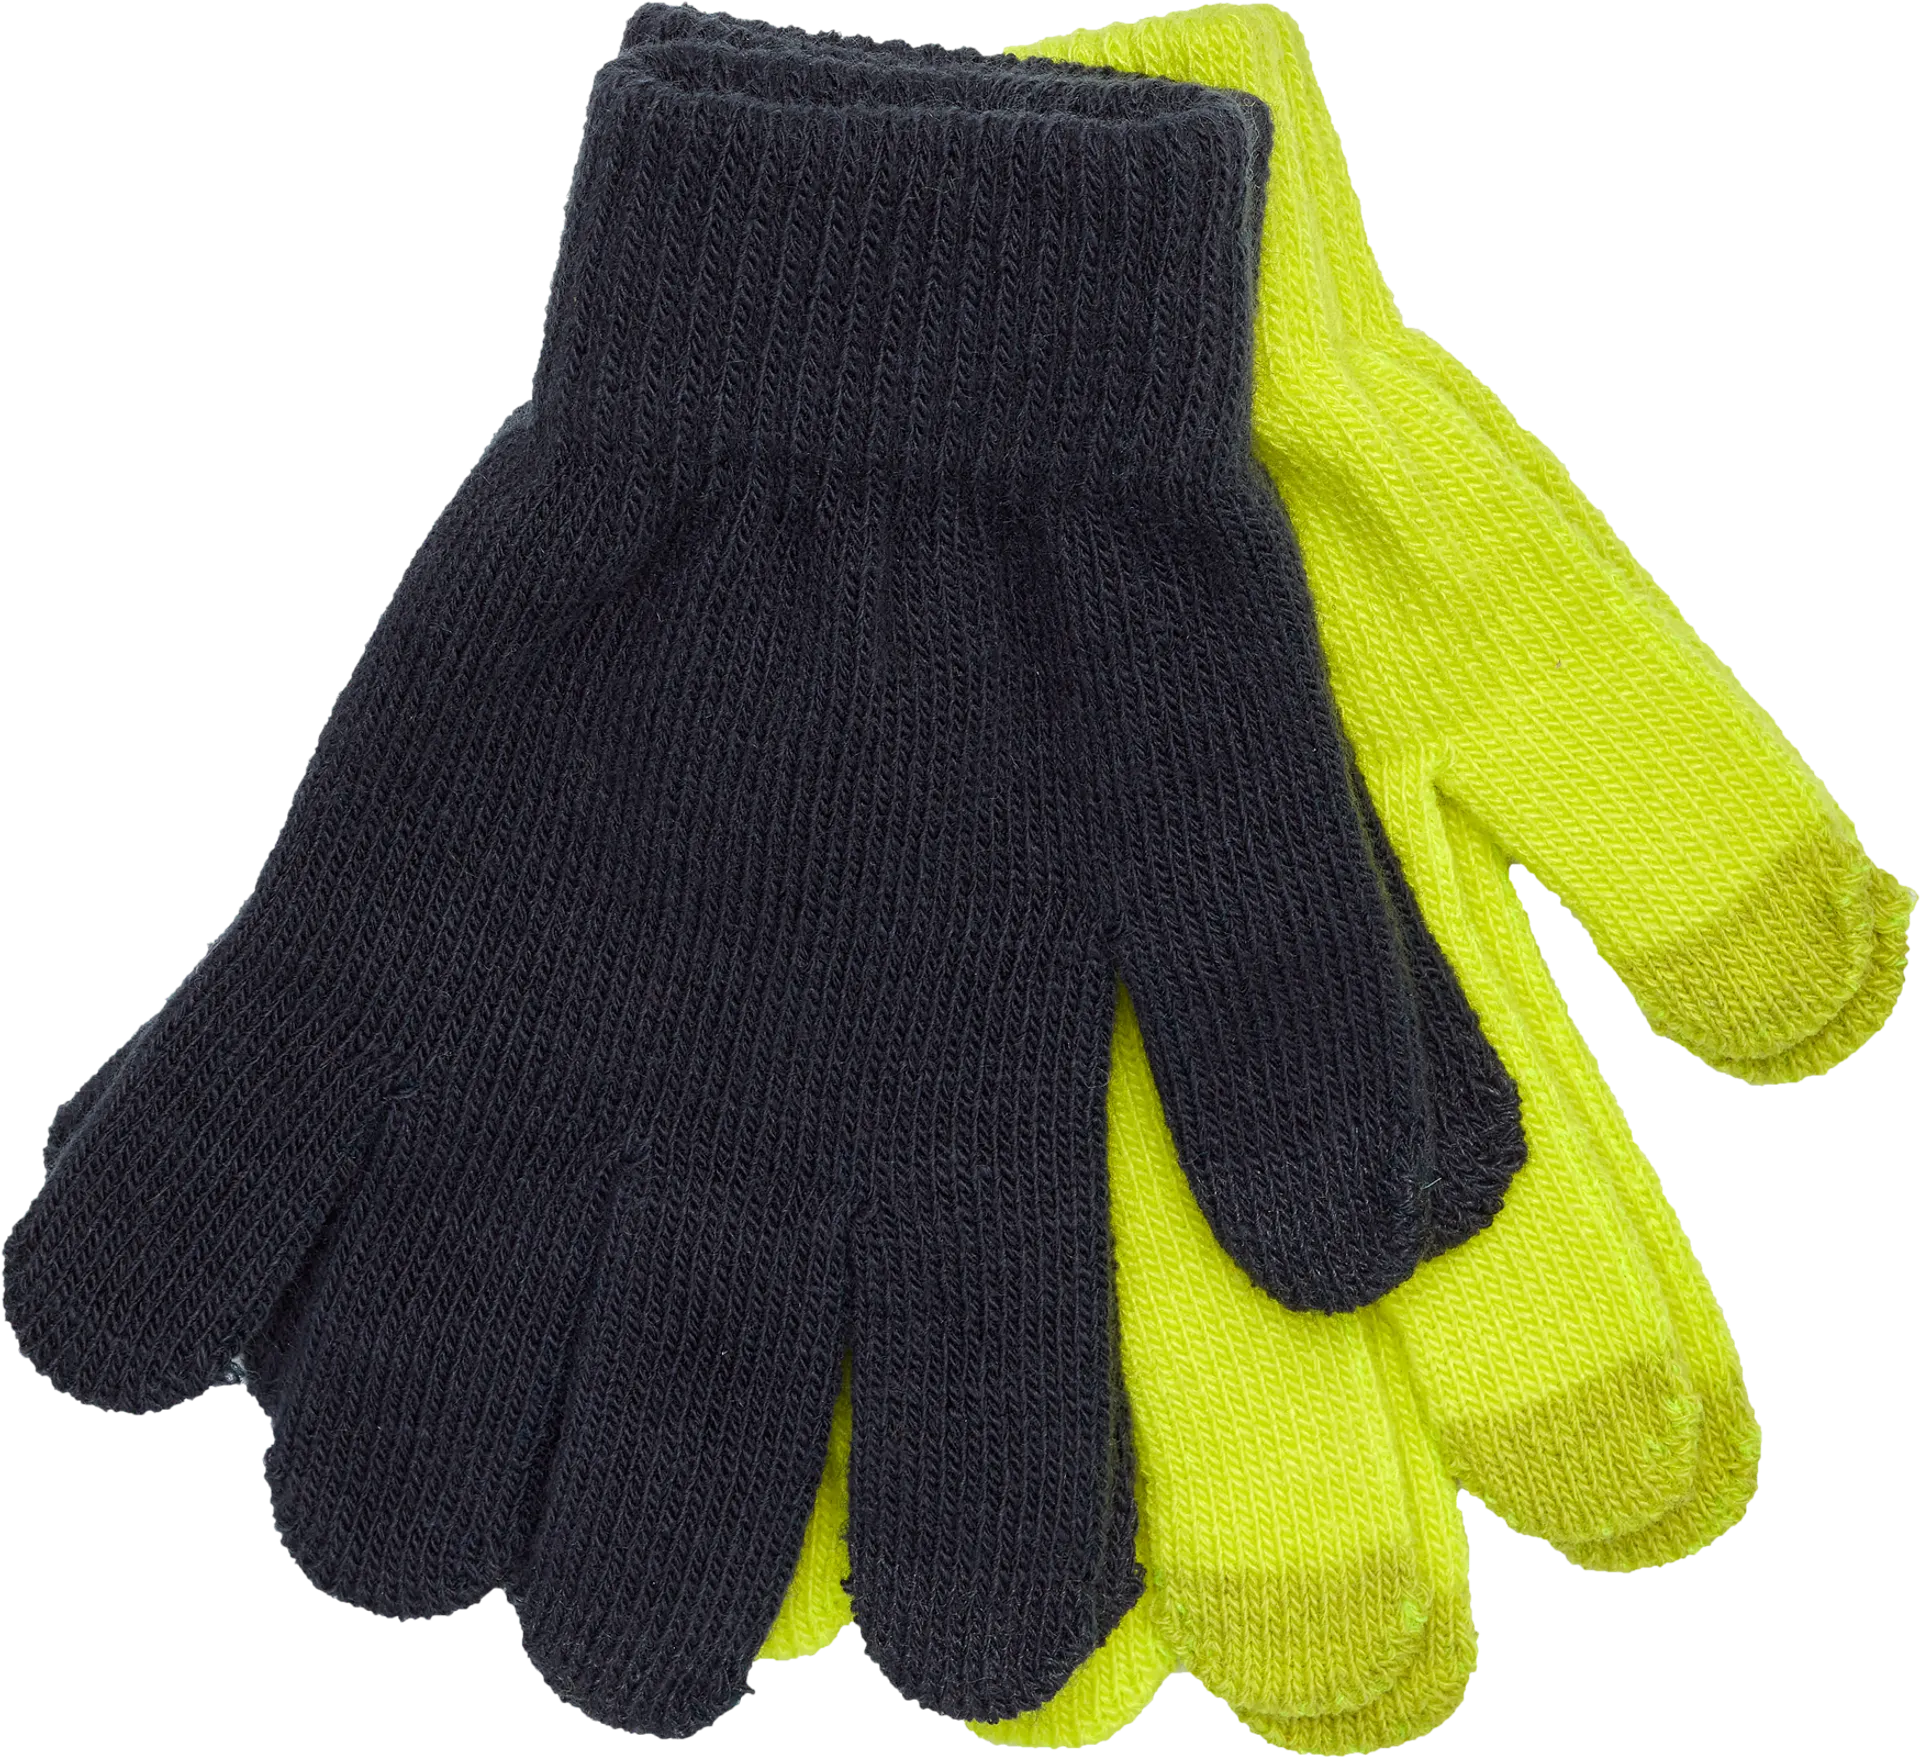 House lasten stretch-sormikkaat touch pad 237G061781 2-pack - Lime/dk.grey